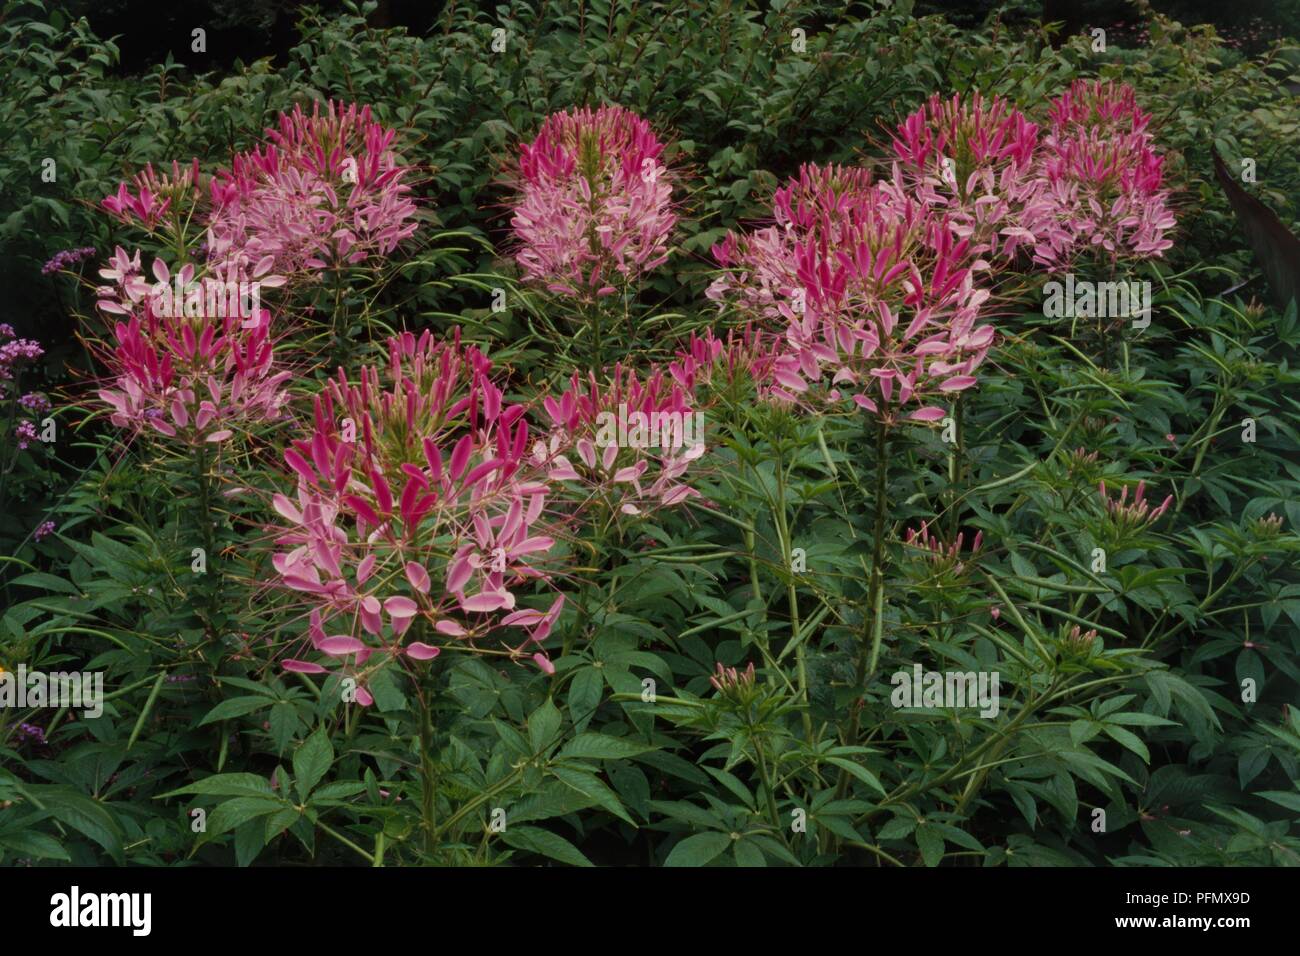 Leaves and pink flower heads from Cleome hassleriana 'Rose Queen' (Spider flower) Stock Photo